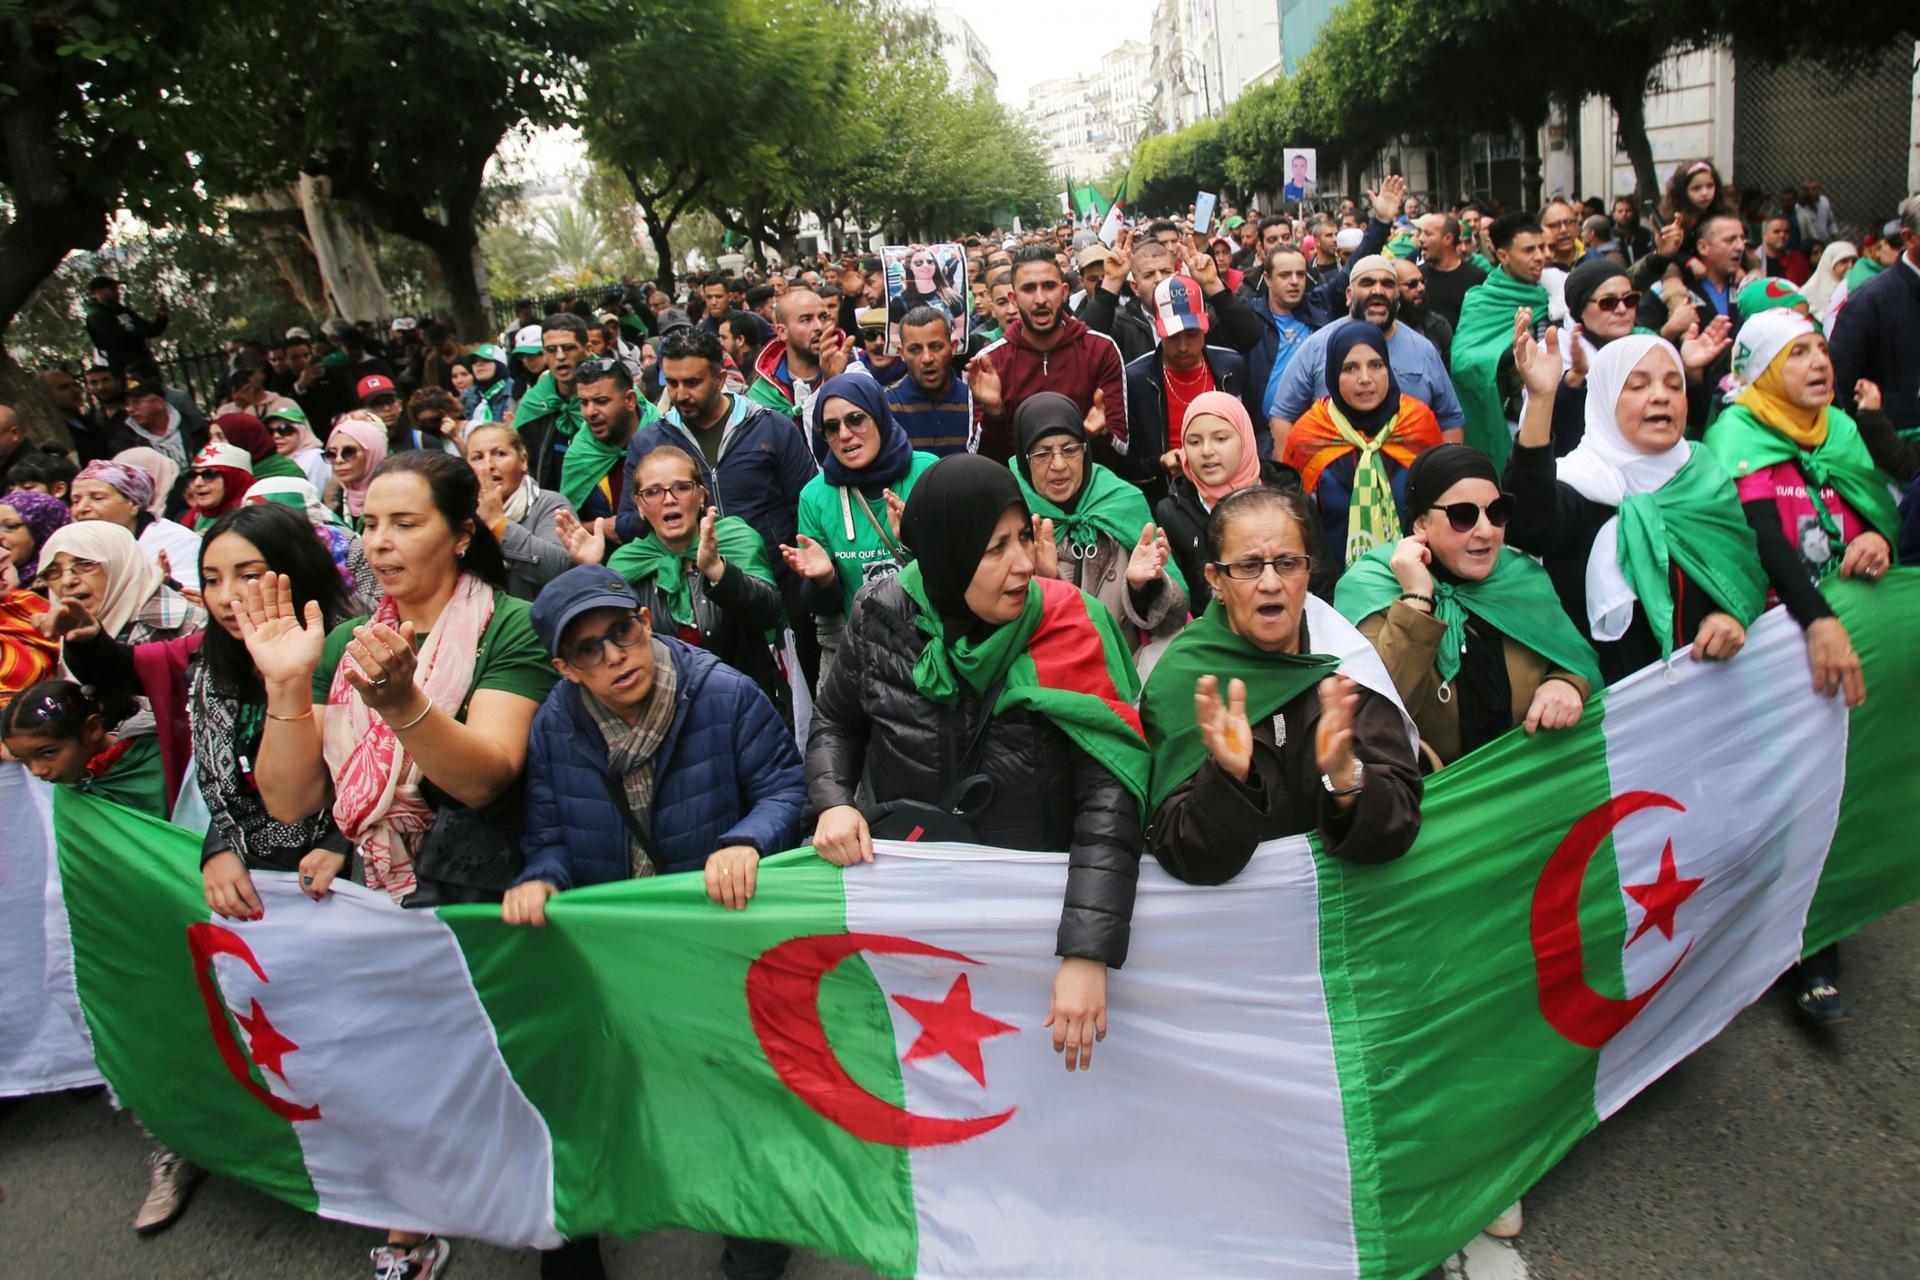 A large group of demonstrators are shown filling a street in Algiers with the Algerian flag in front of them.